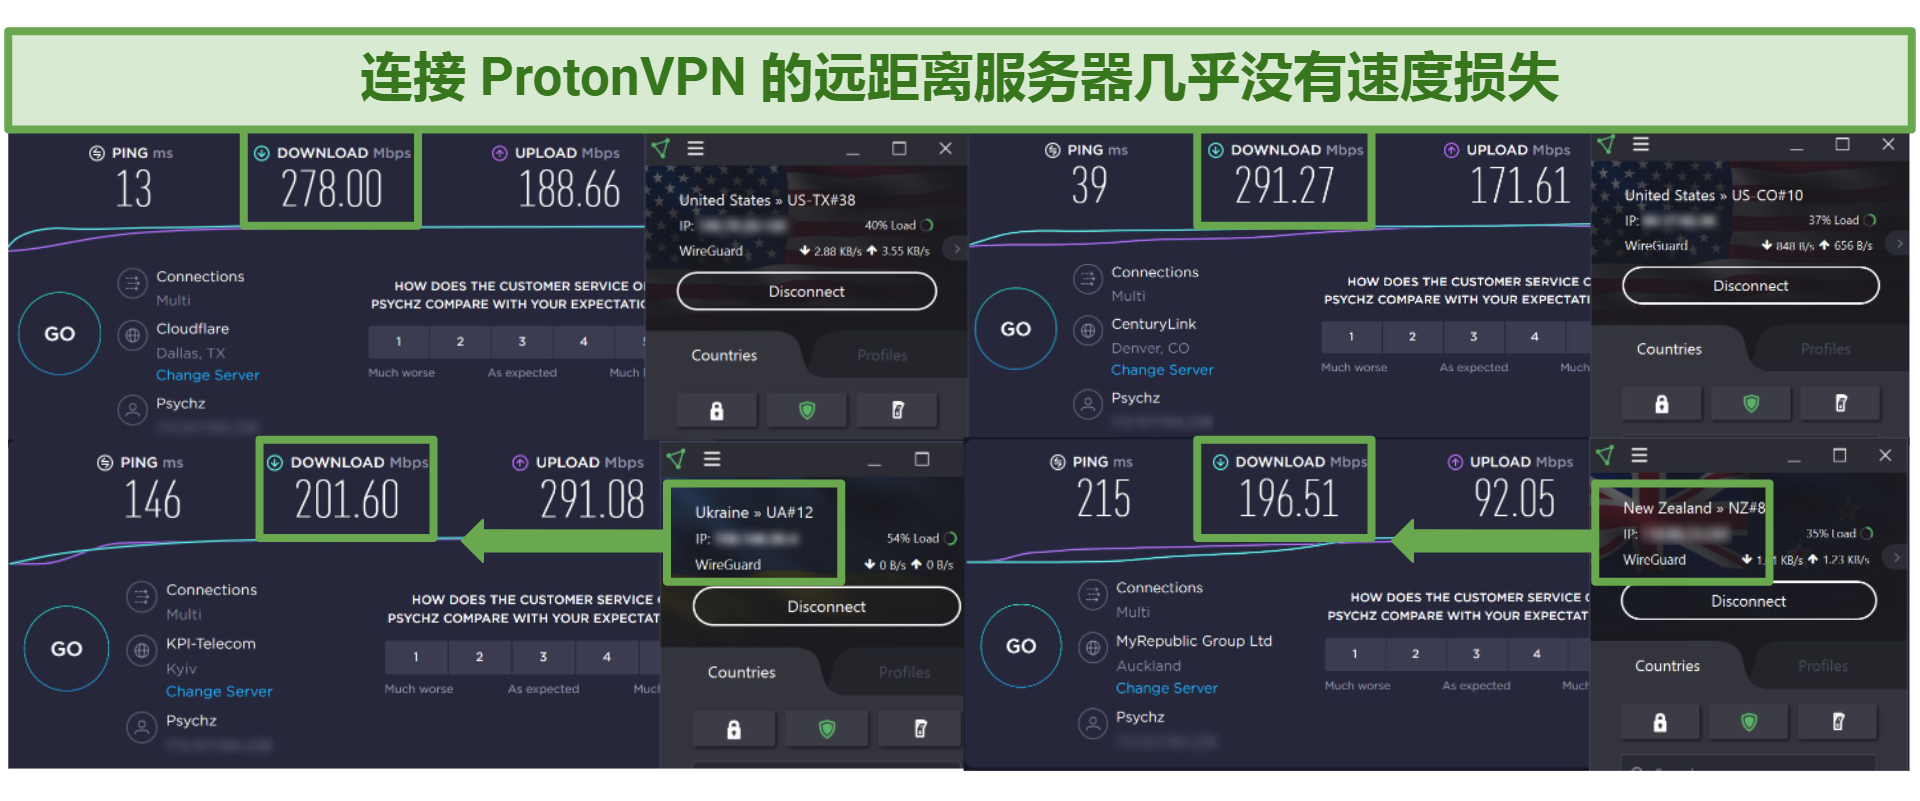 Speed test results using ProtonVPN connected to 4 different server locations